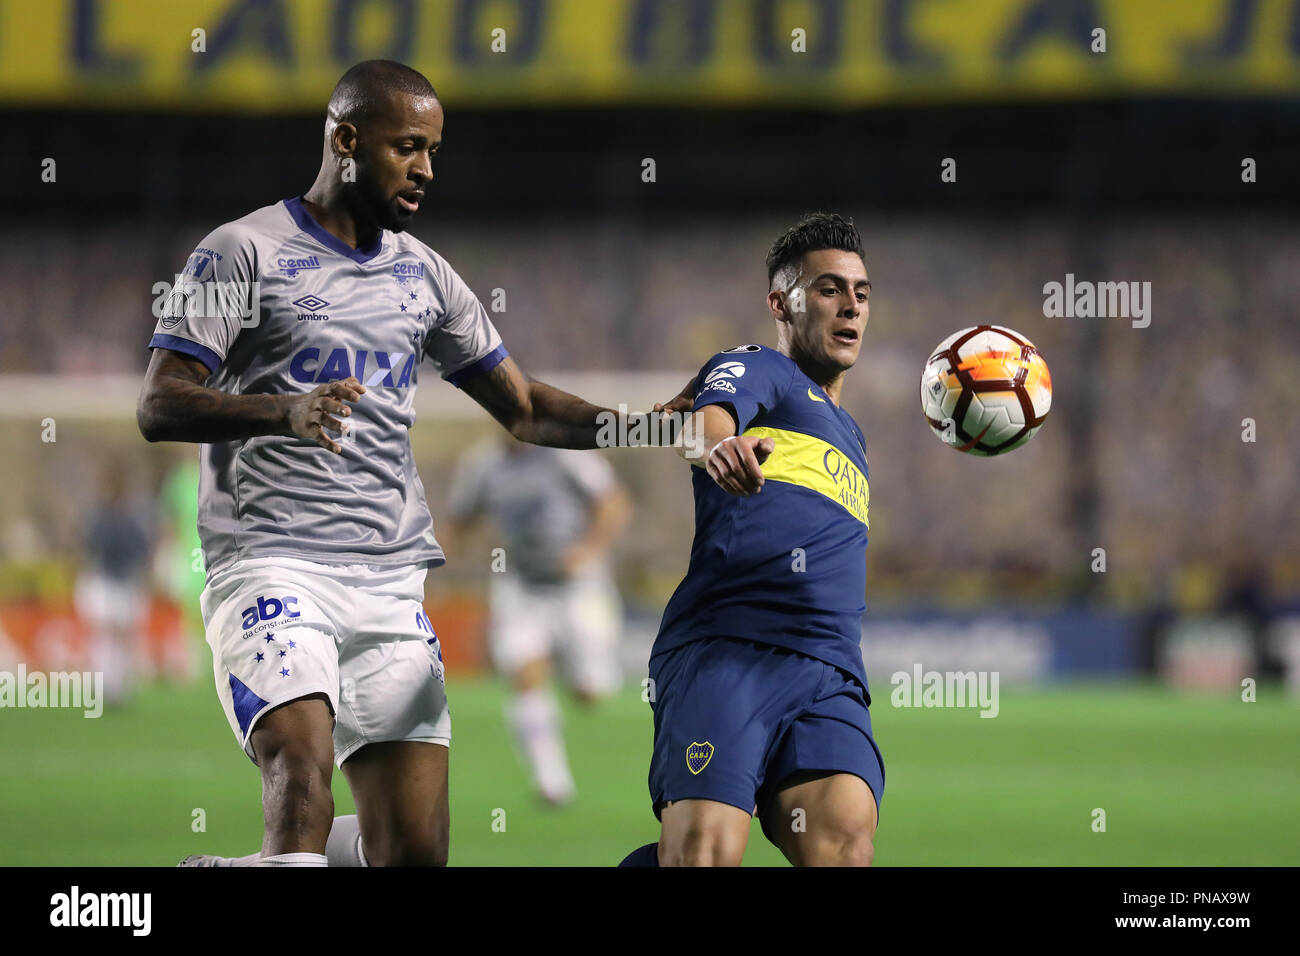 BUENOS AIRES, ARGENTINA - SEPTEMBER 19, 2018: Cristian Pavon (Boca) taking possesion of the ball against cruzeiro for the libertadores 2018 in Buenos  Stock Photo